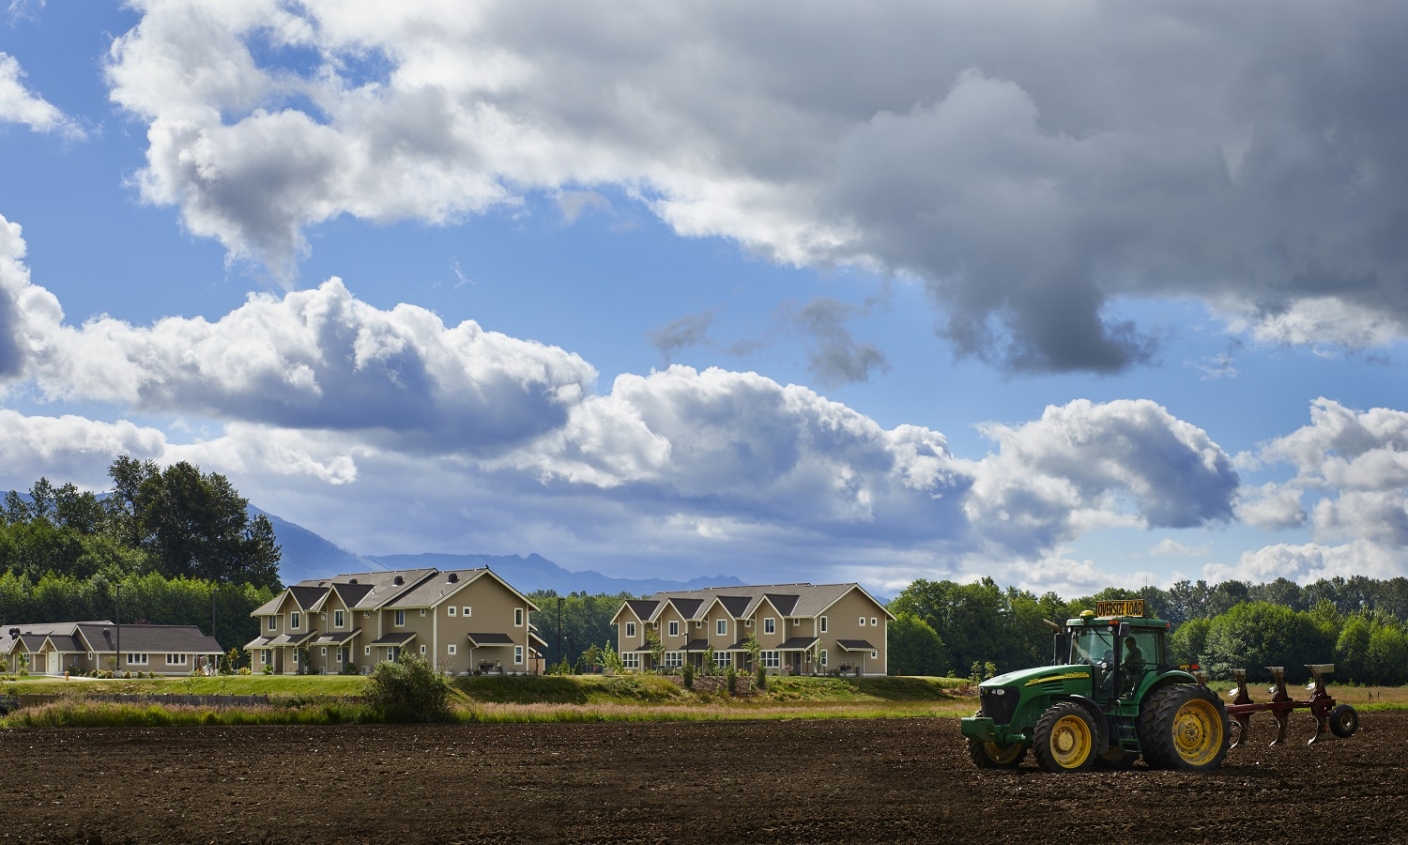 view of farmland with large tractor tilling a field, with blue sky, clouds, and beige housing in background